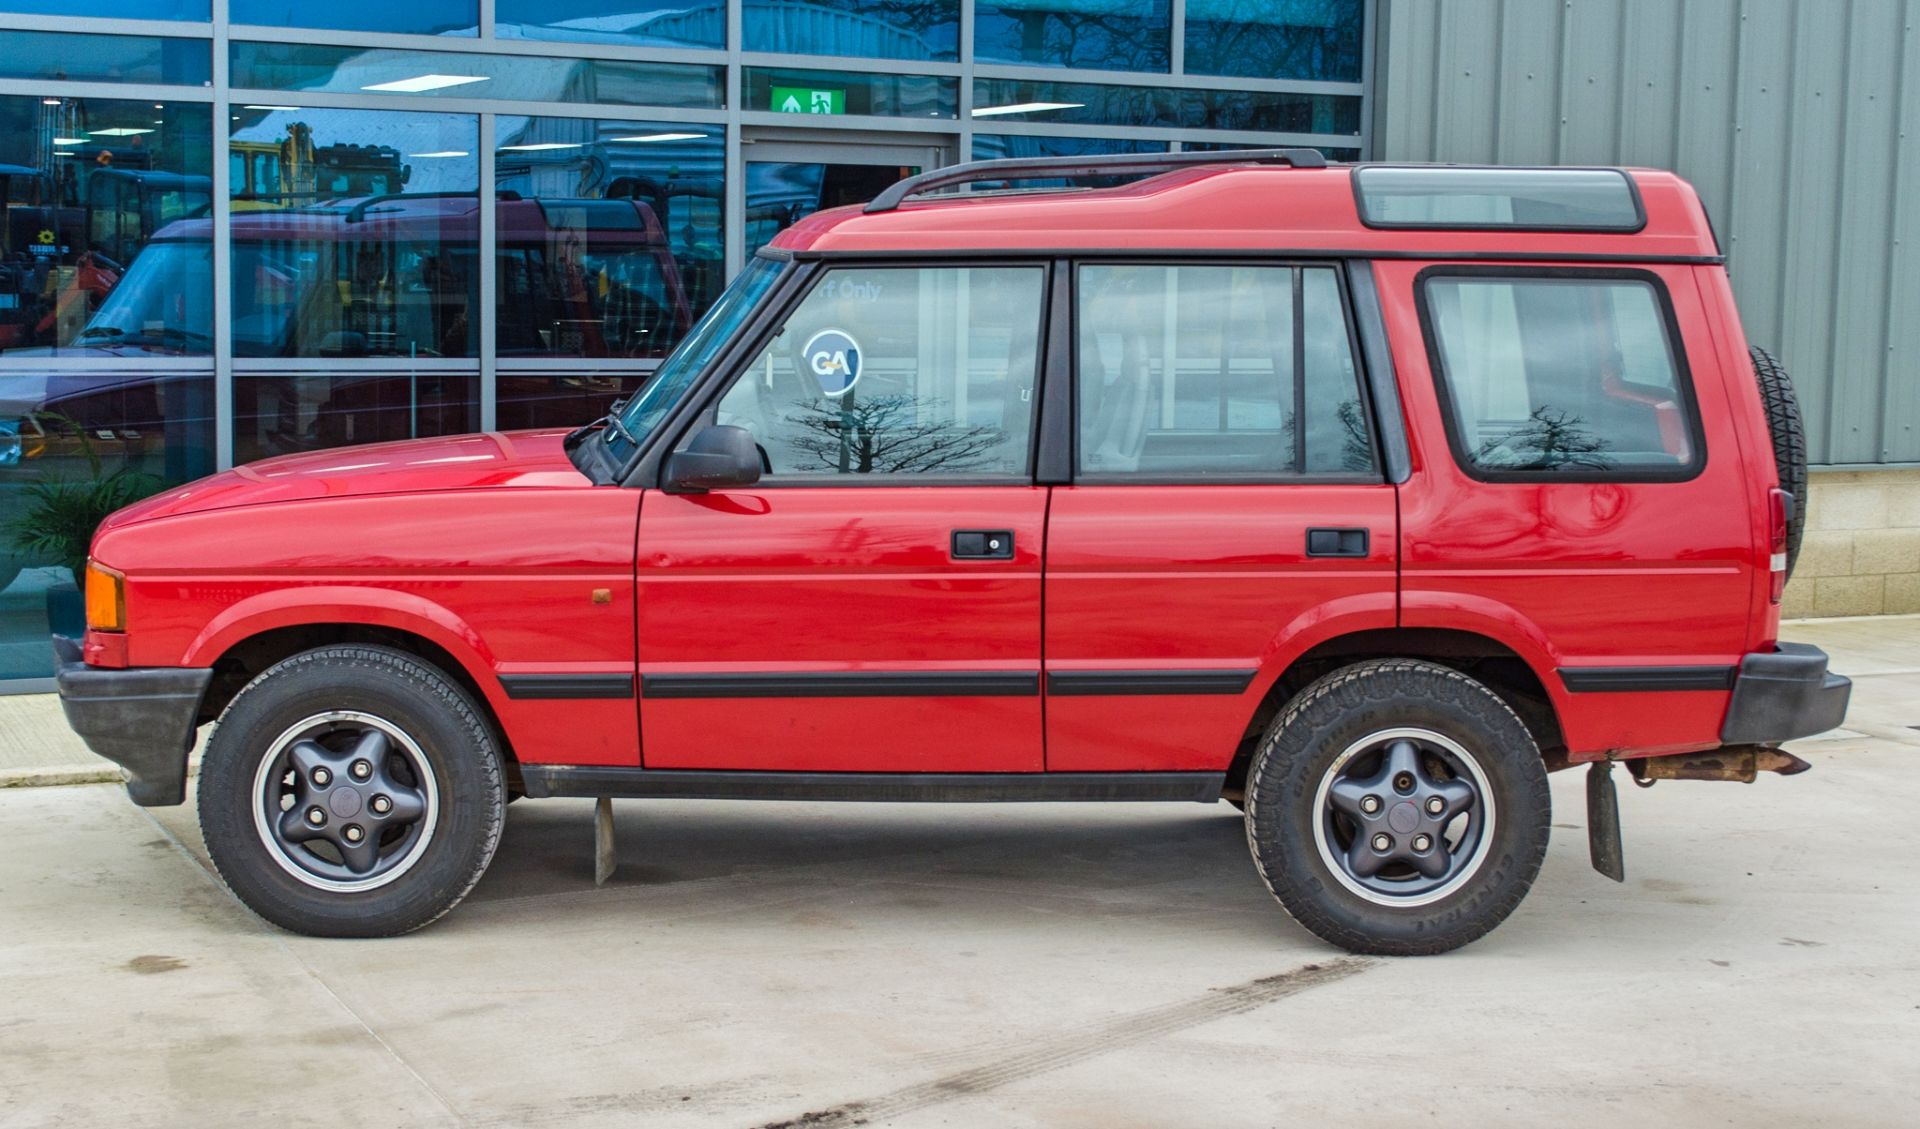 1998 Landrover Discovery 3.9 litre V8 manual 5 door 4wd - Image 16 of 46